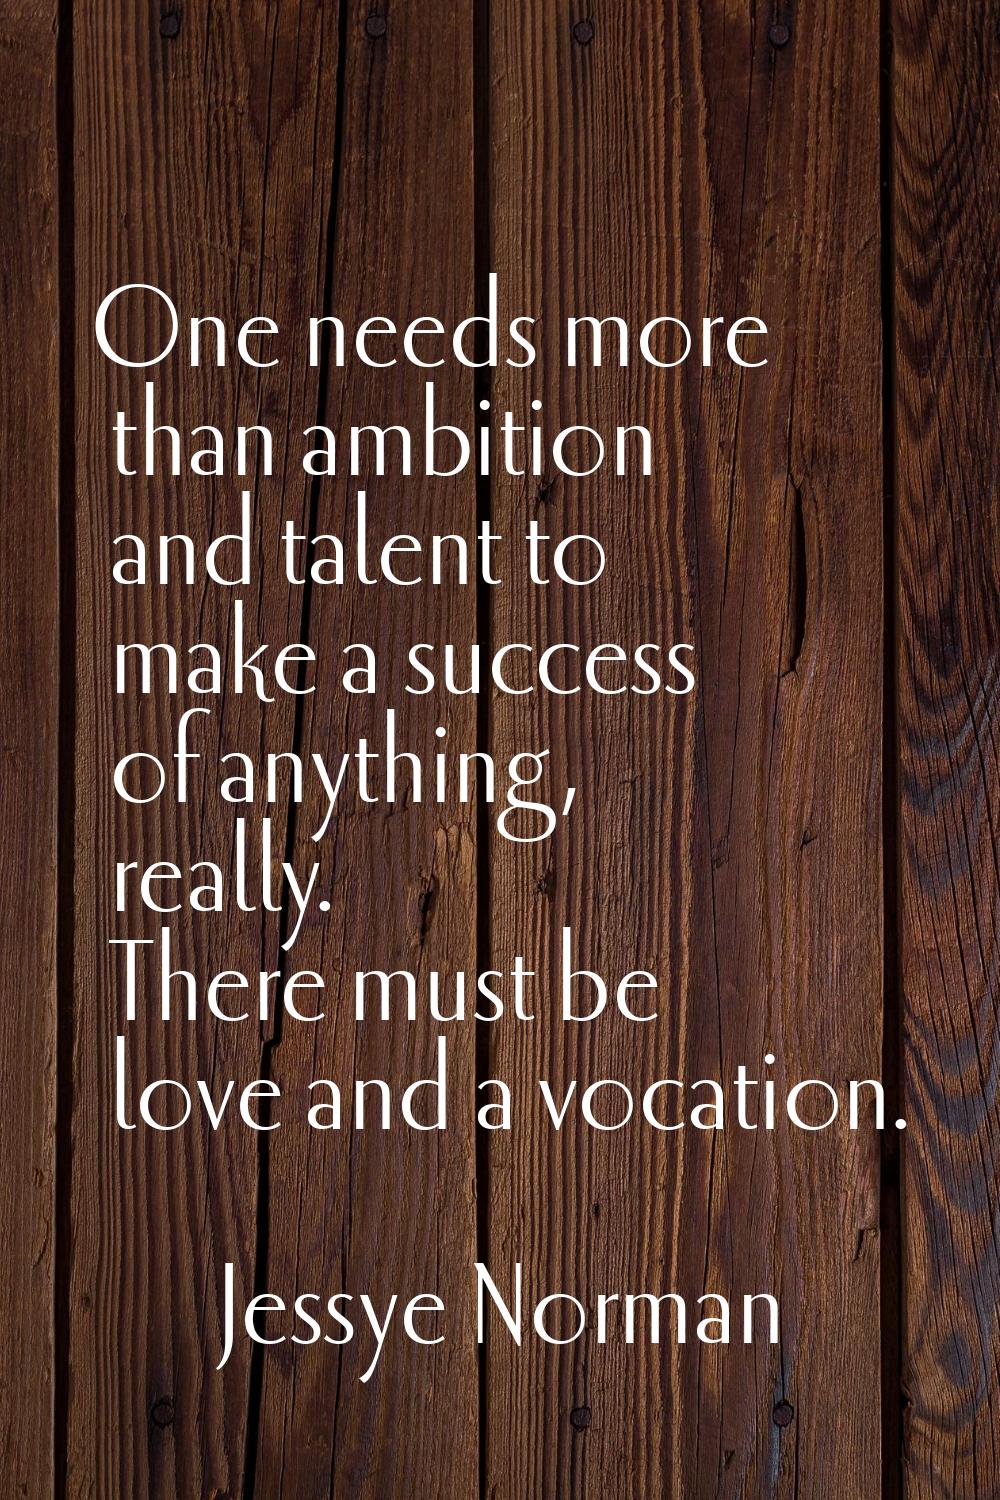 One needs more than ambition and talent to make a success of anything, really. There must be love a